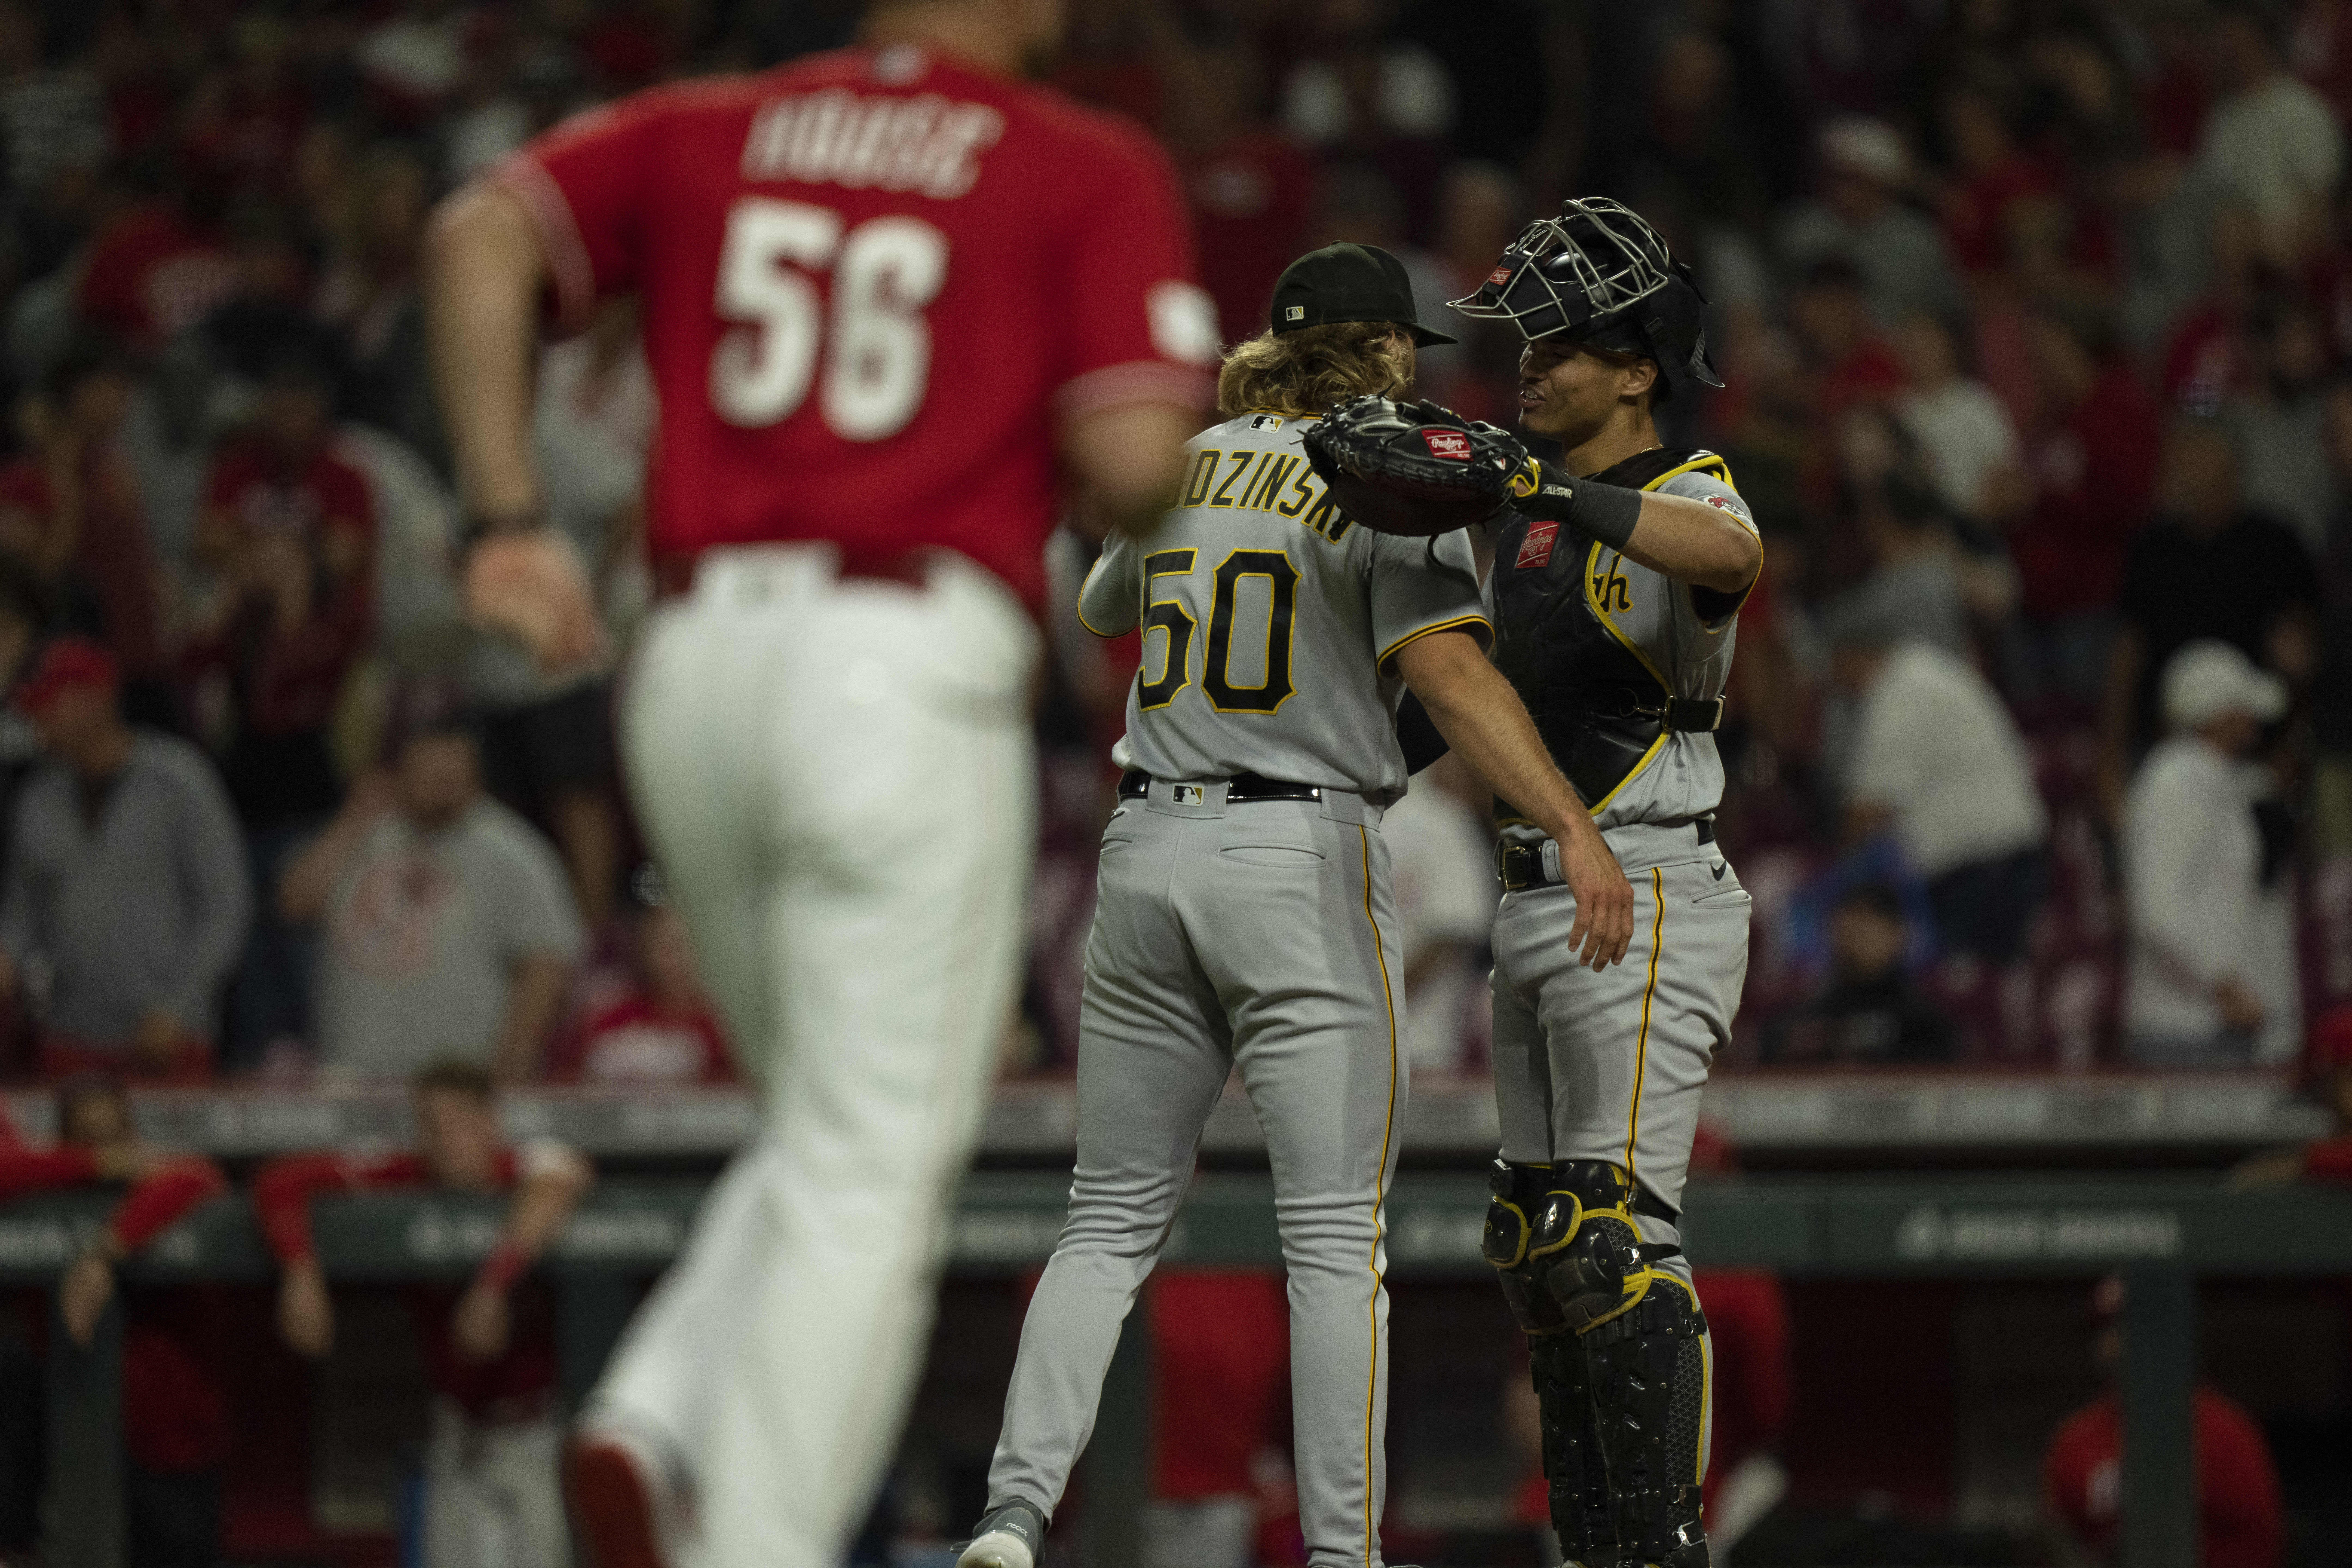 HISTORY! Pirates come back from 9-0 to beat Reds 13-12 – WPXI